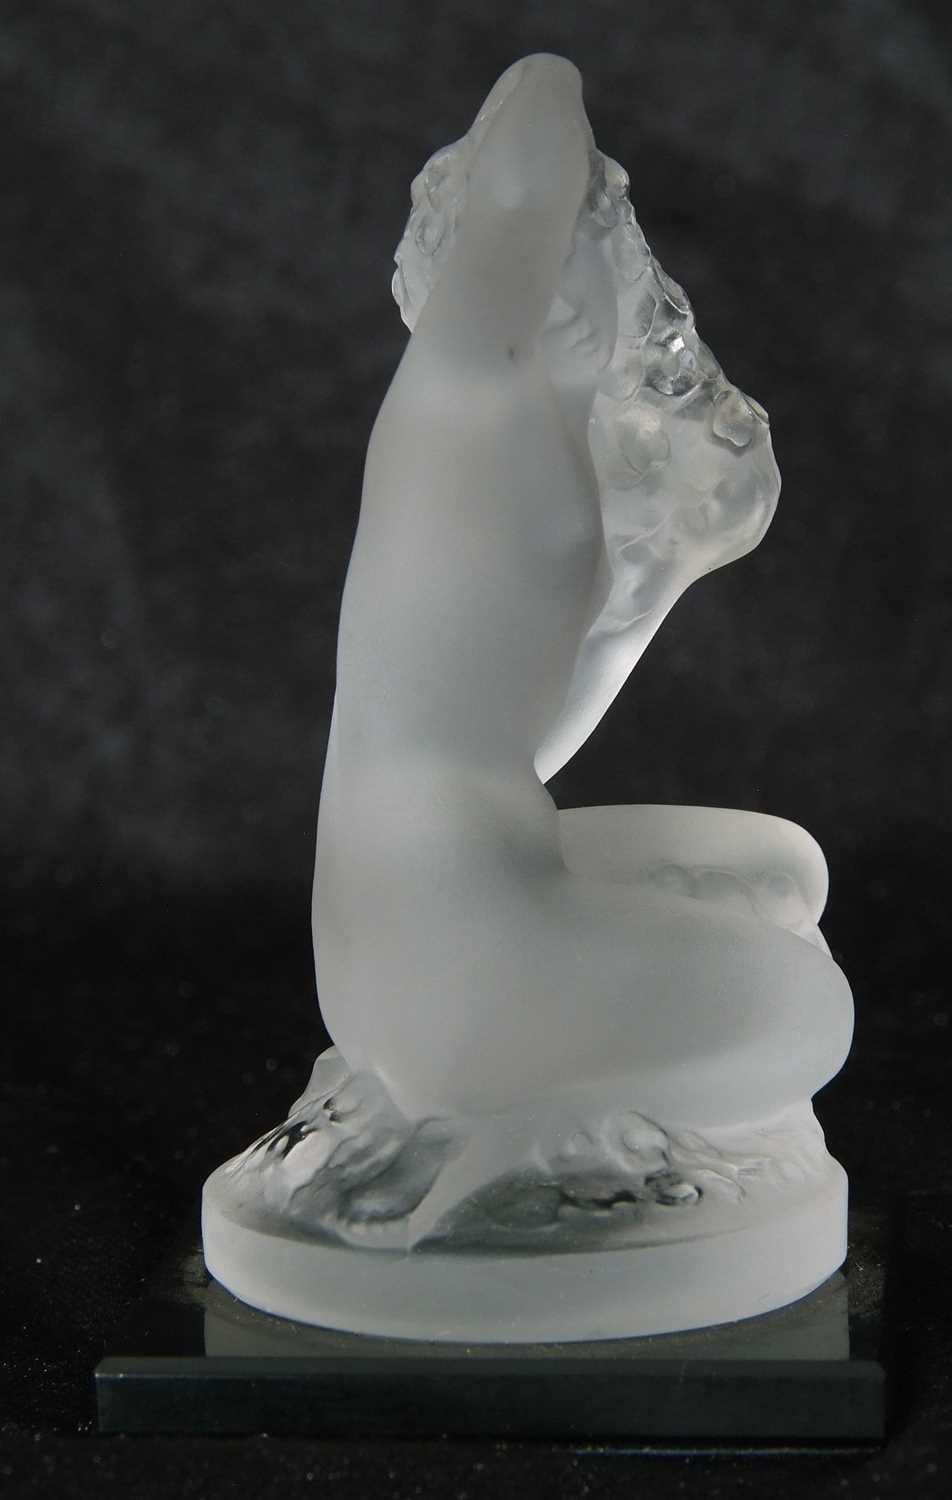 Small Lalique model of a nude lady crouching on circular base, mounted on a black glass - Image 2 of 4